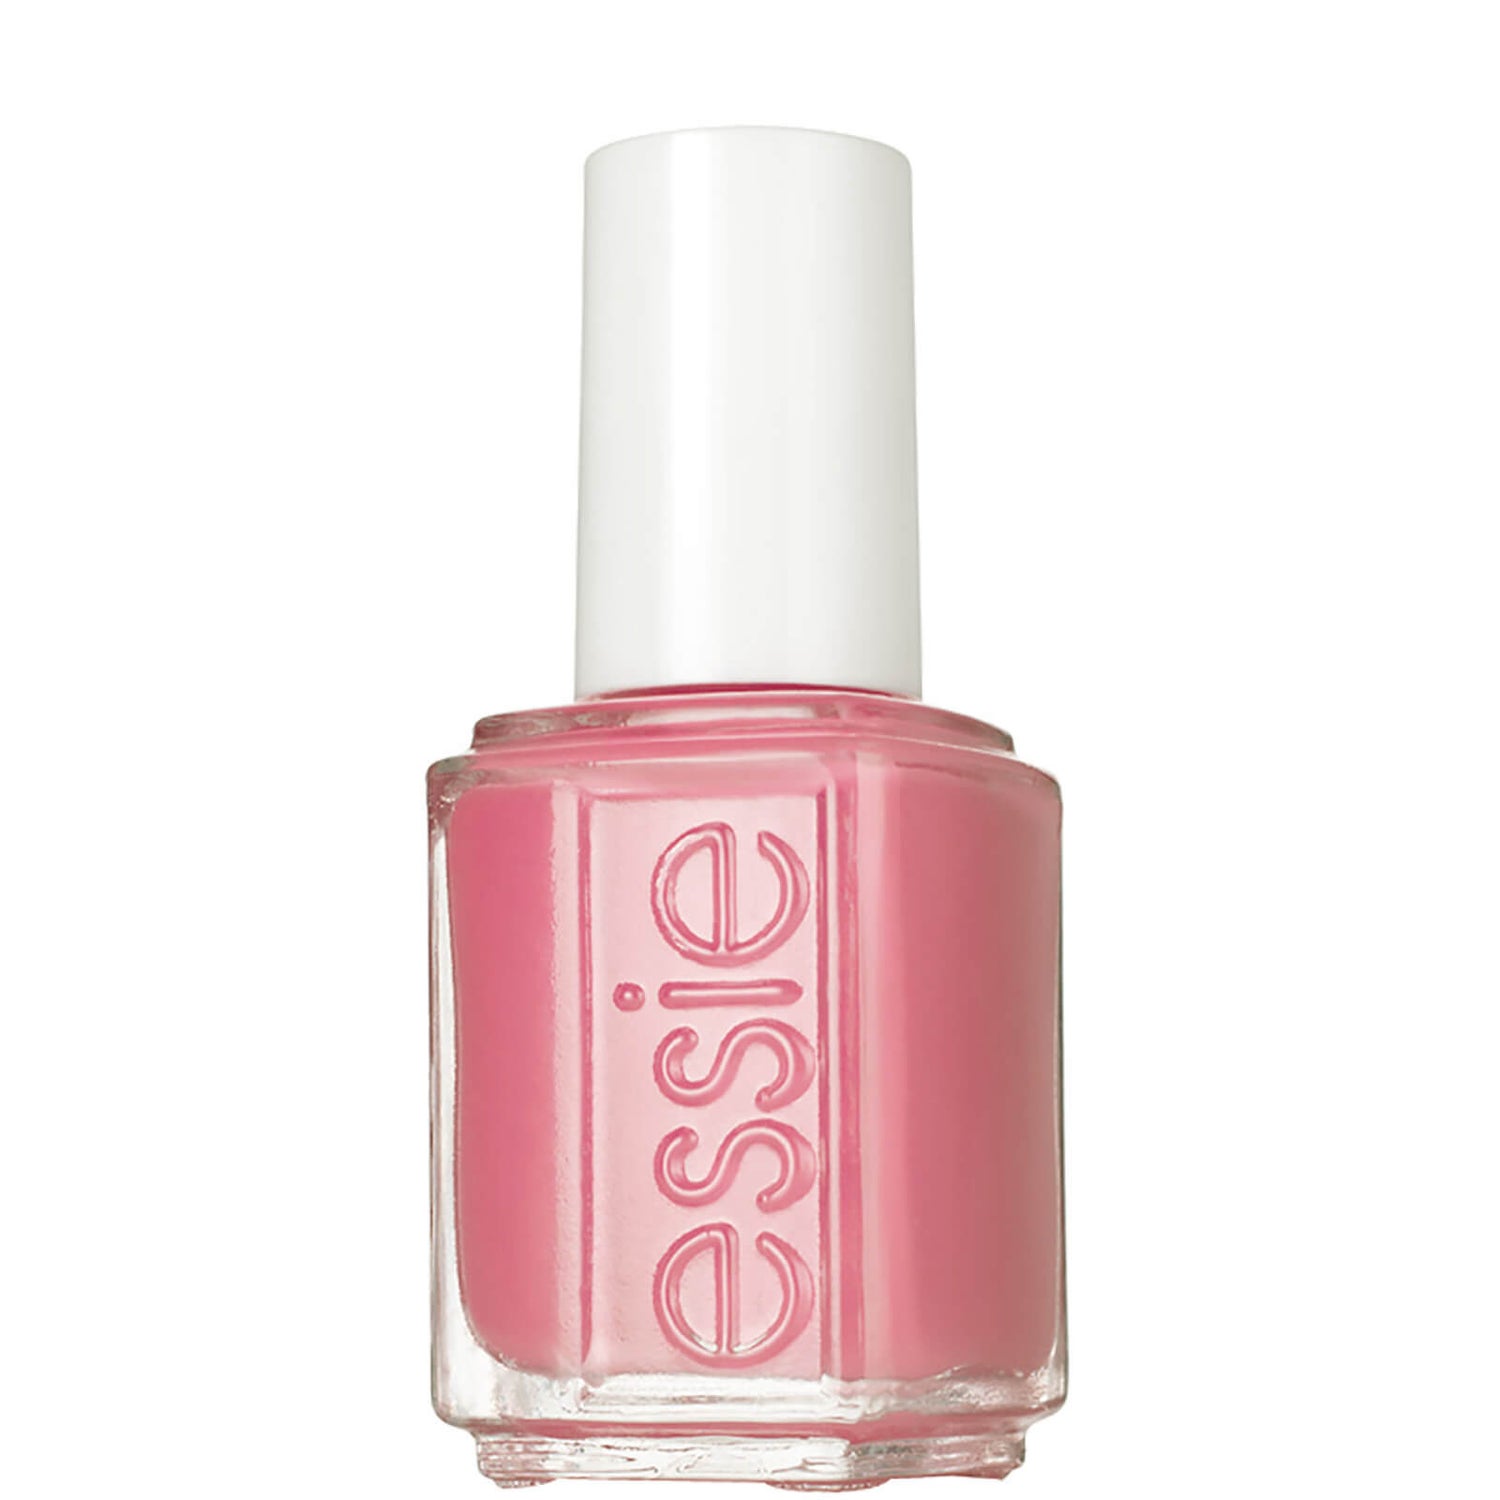 essie All Tied Up Vernis à Ongles (15ml)